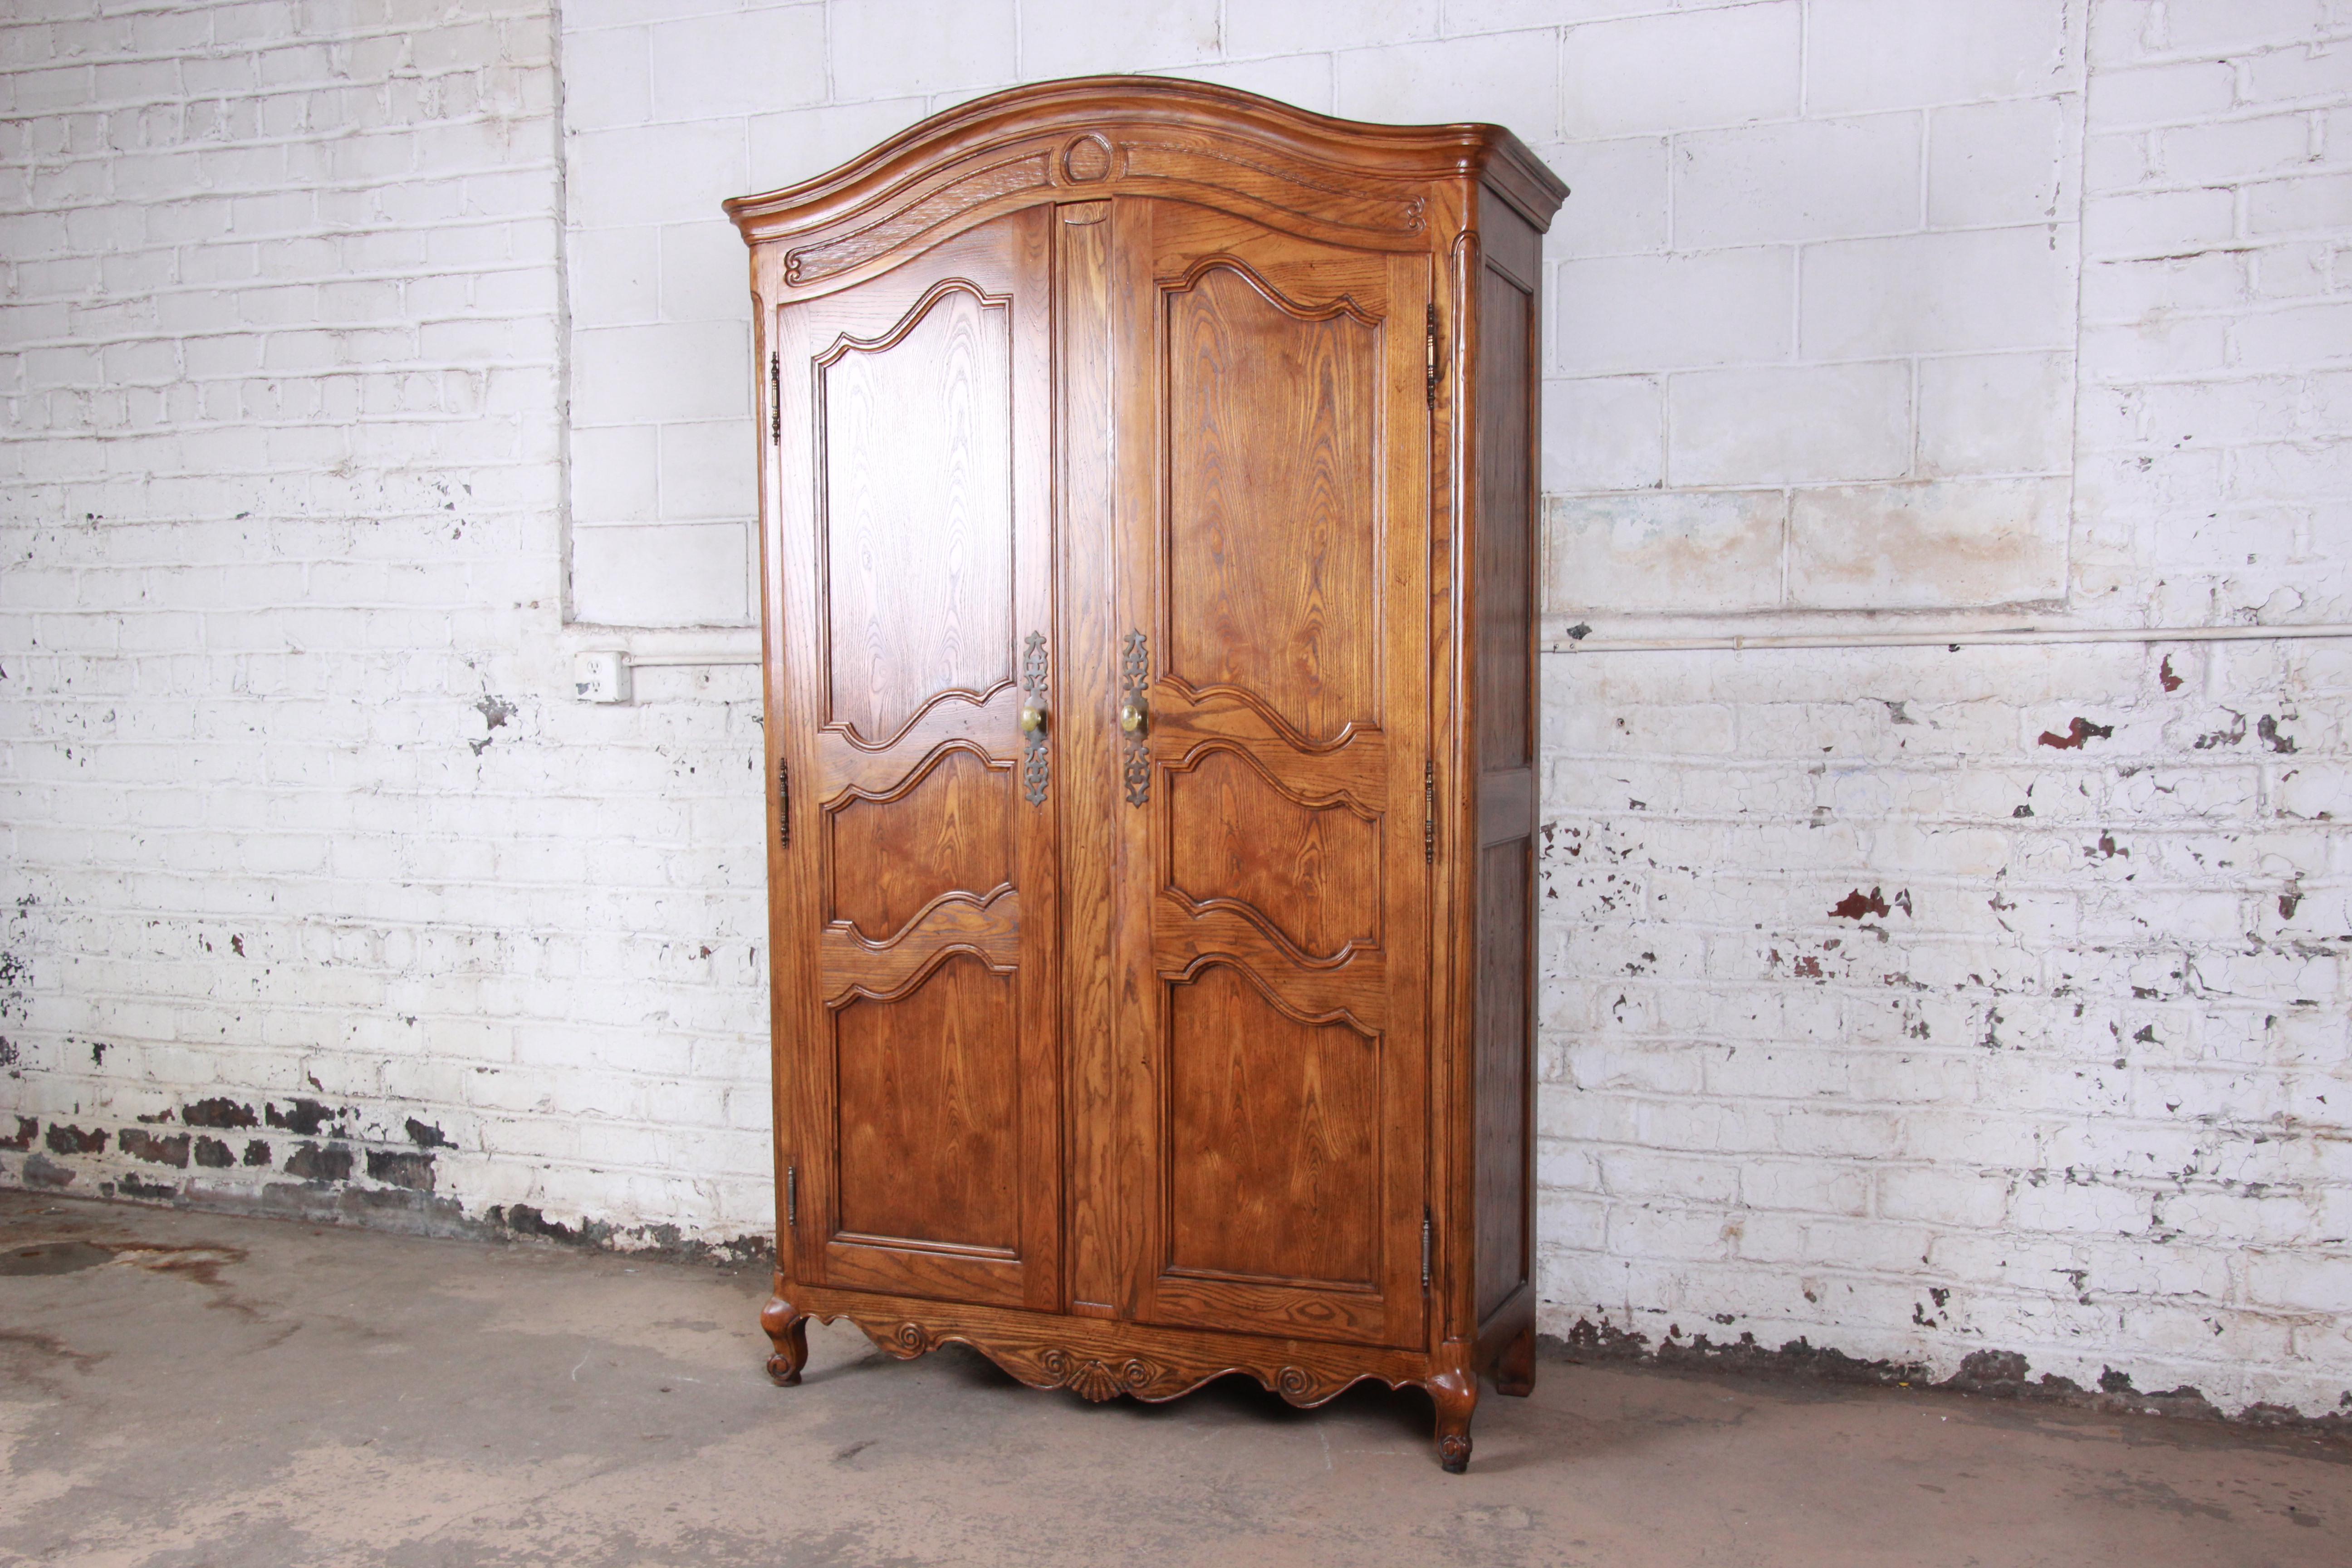 Offering a gorgeous French provincial Louis XV style armoire or wardrobe by Baker furniture. The armoire features beautiful carved wood details and solid oak construction. It offers ample room for storage, with three open shelves, three cubbies, and